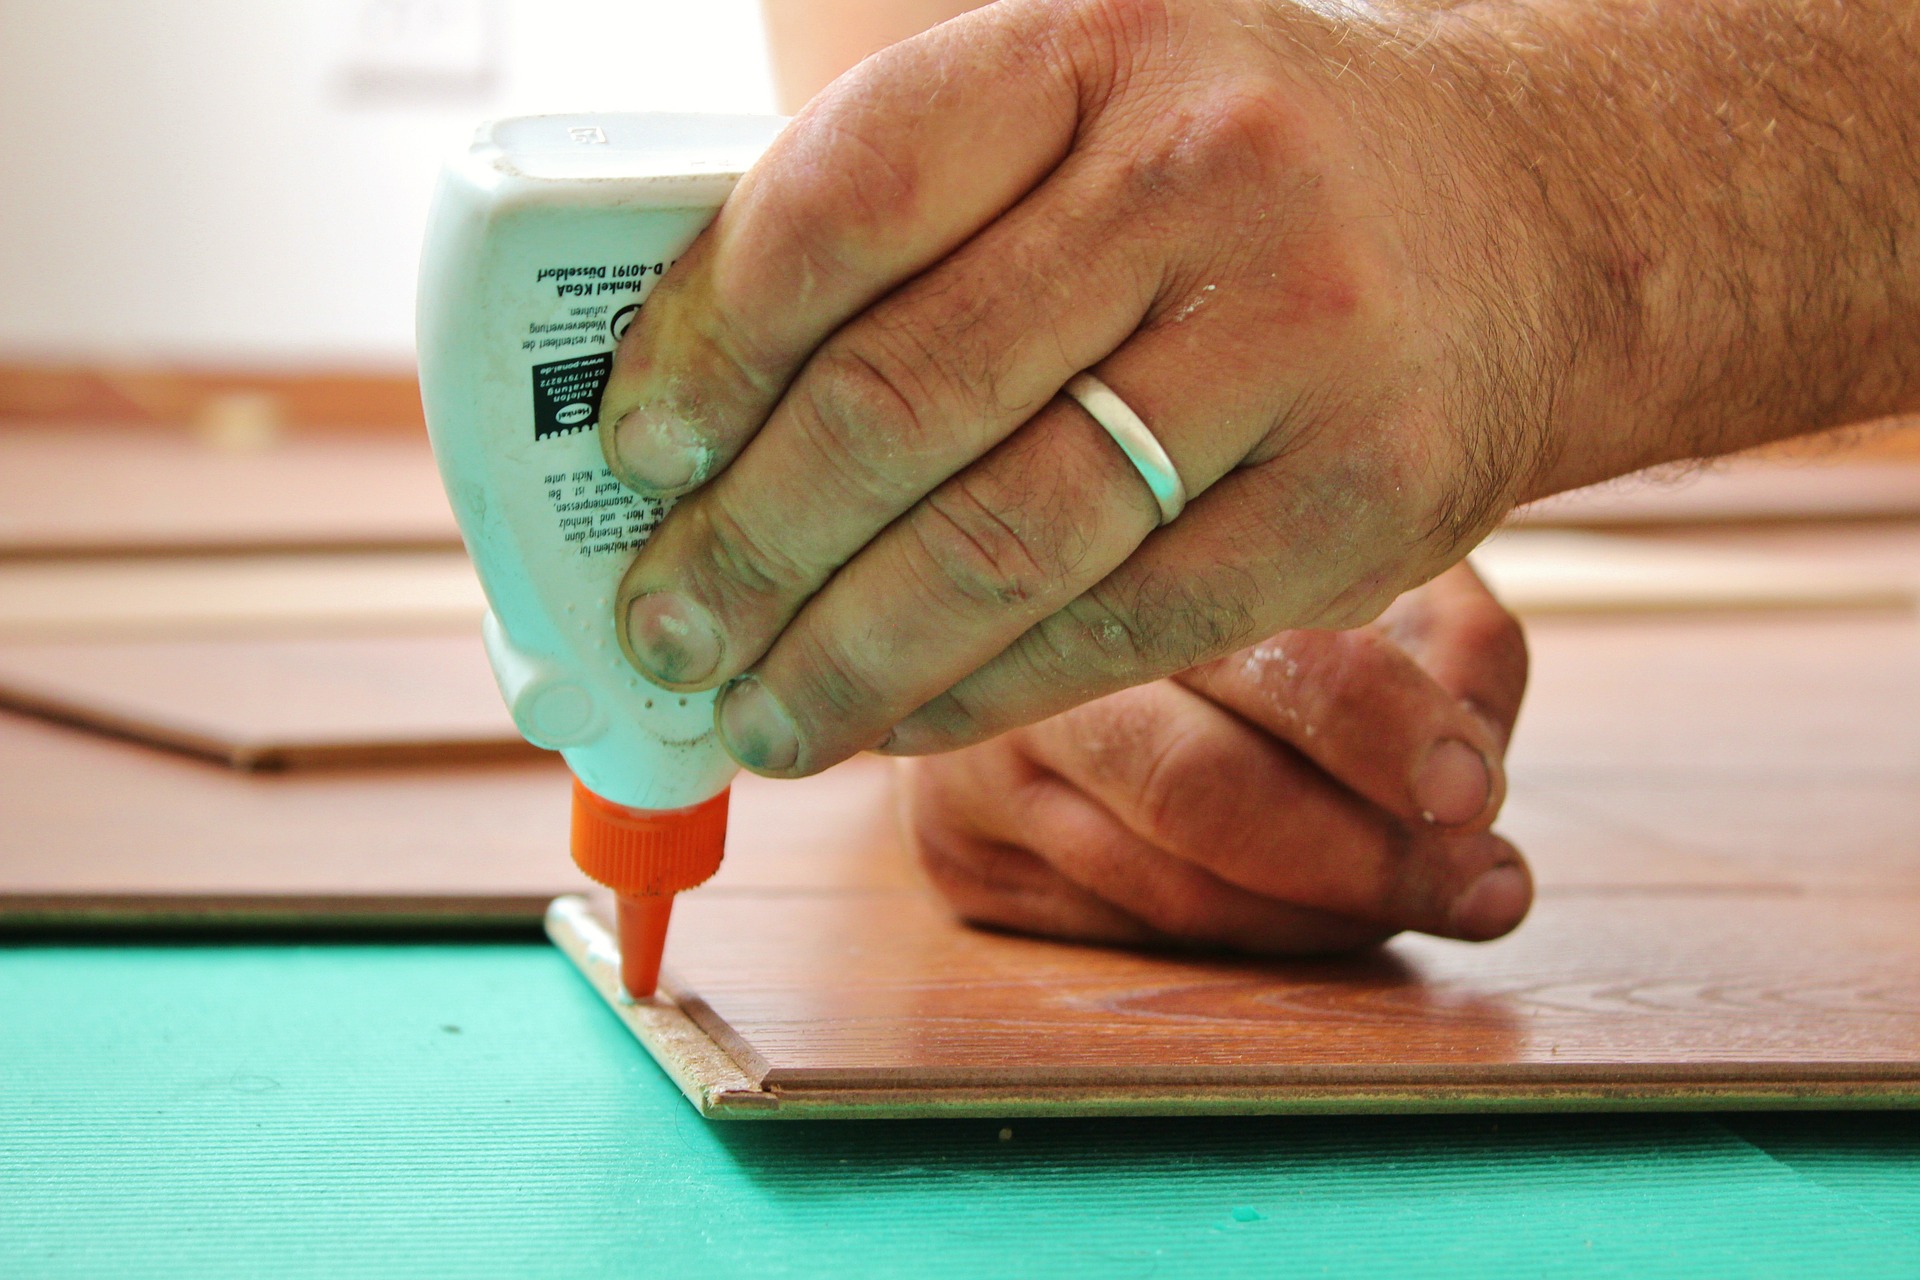 Best Wood Glue In 2021 - For Woodwork And Home Repair